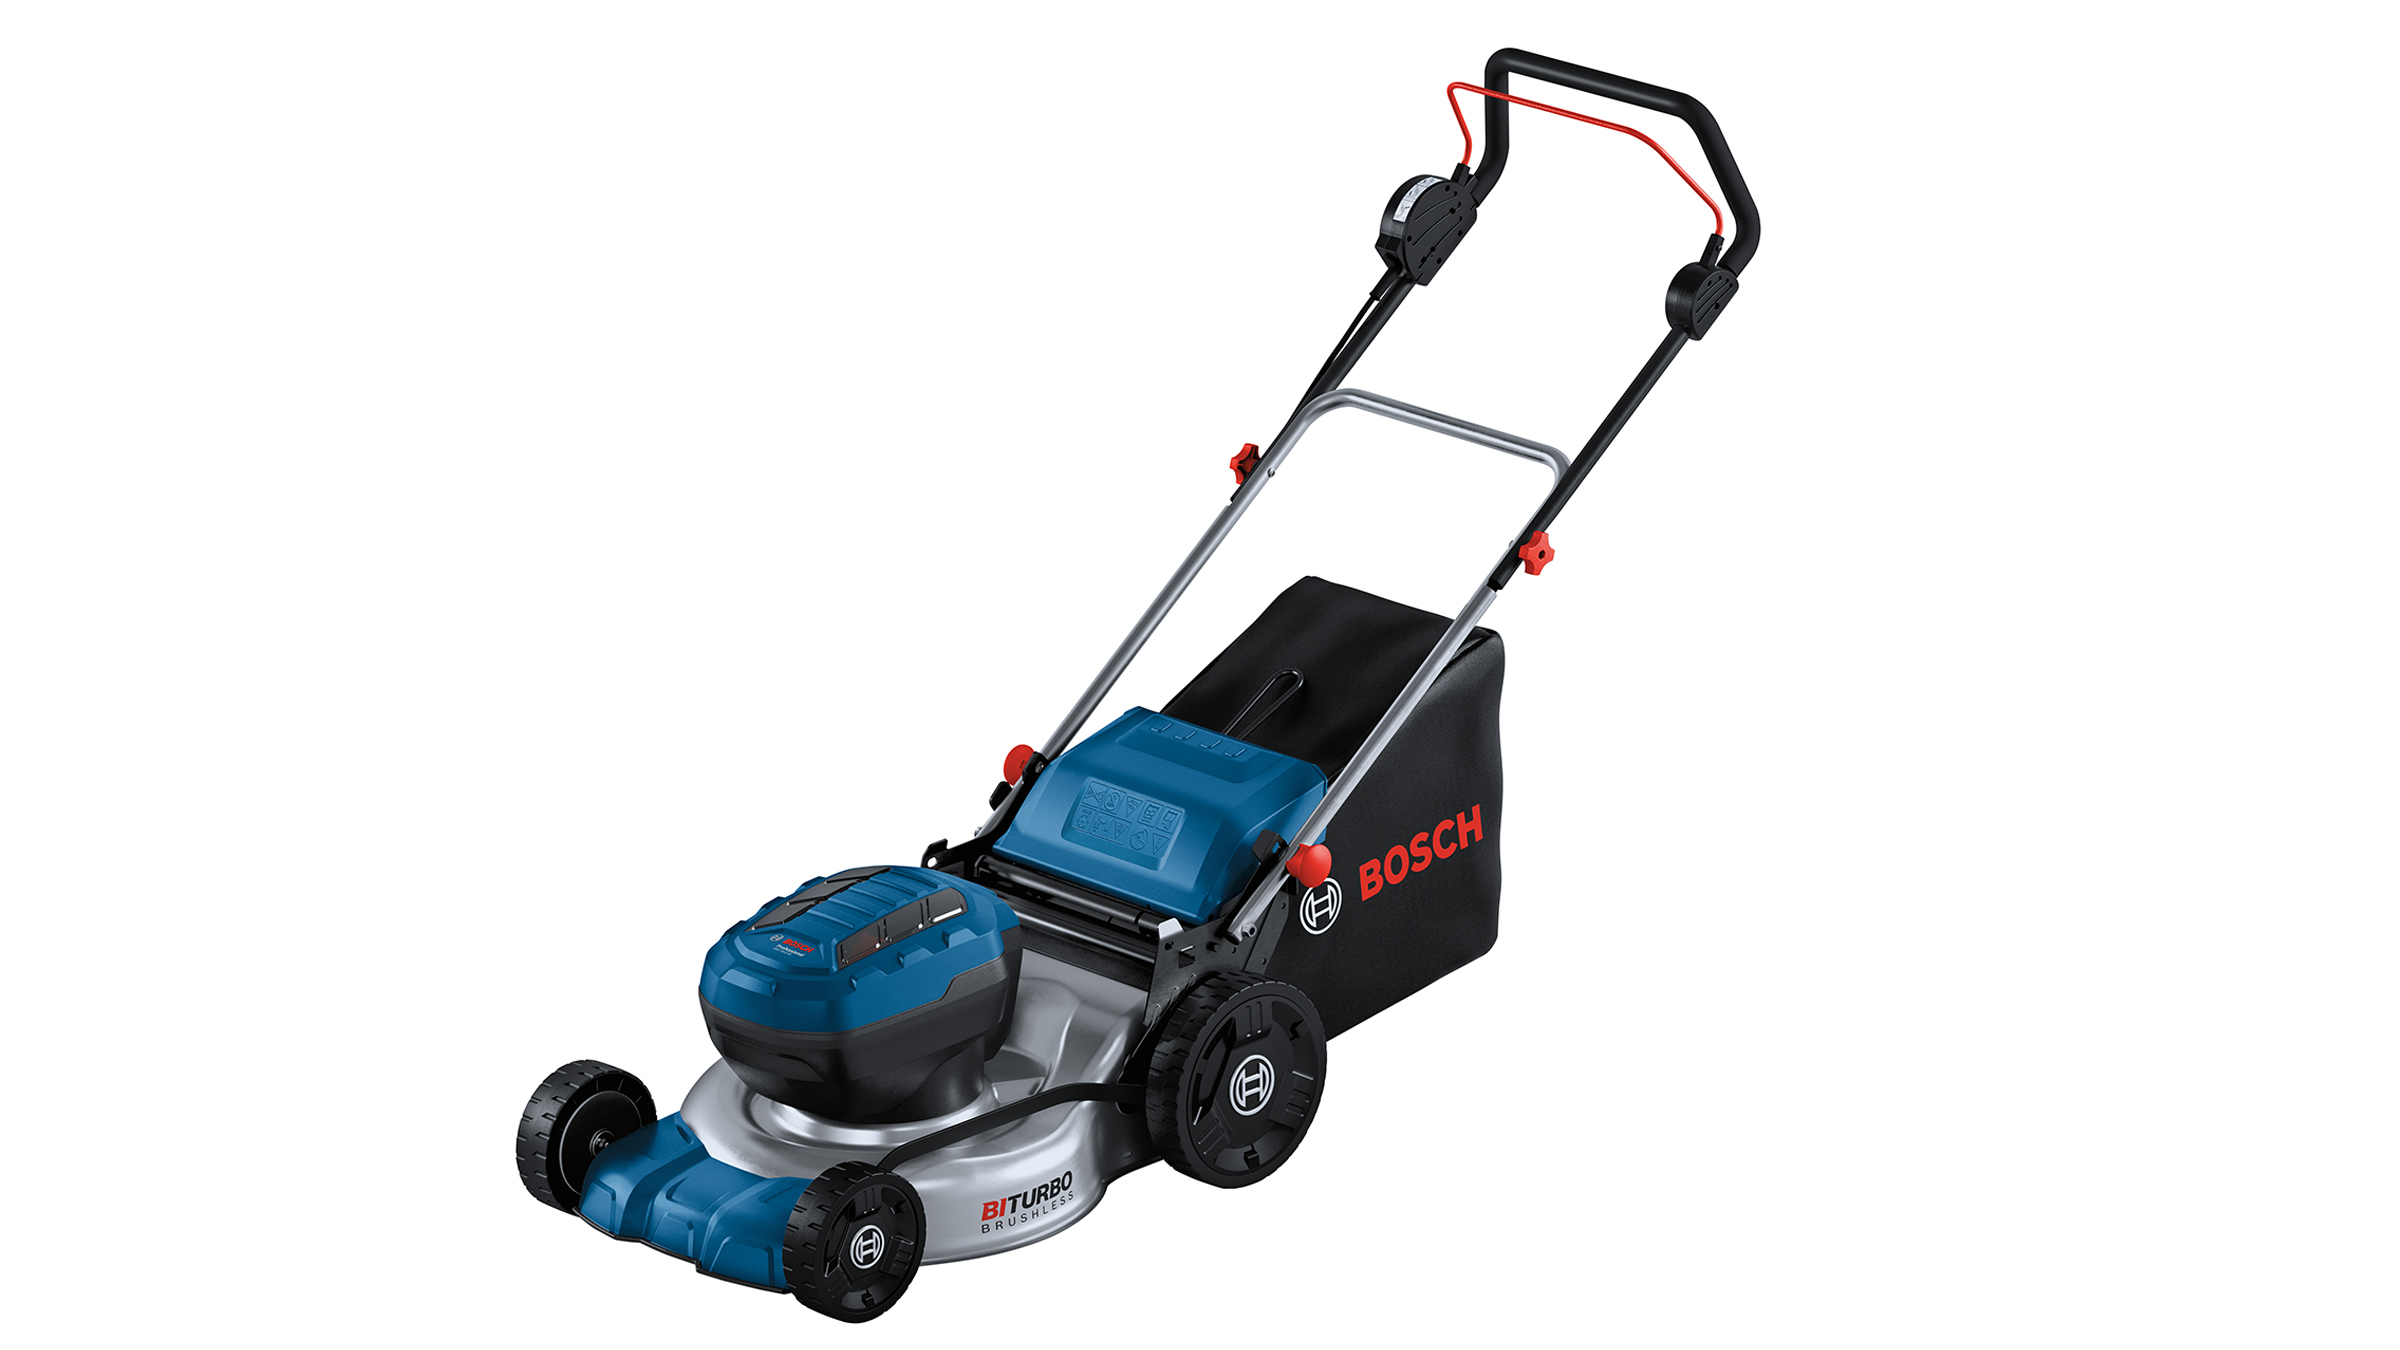 New addition to the Professional 18V System: Powerful Bosch Professional cordless lawnmower